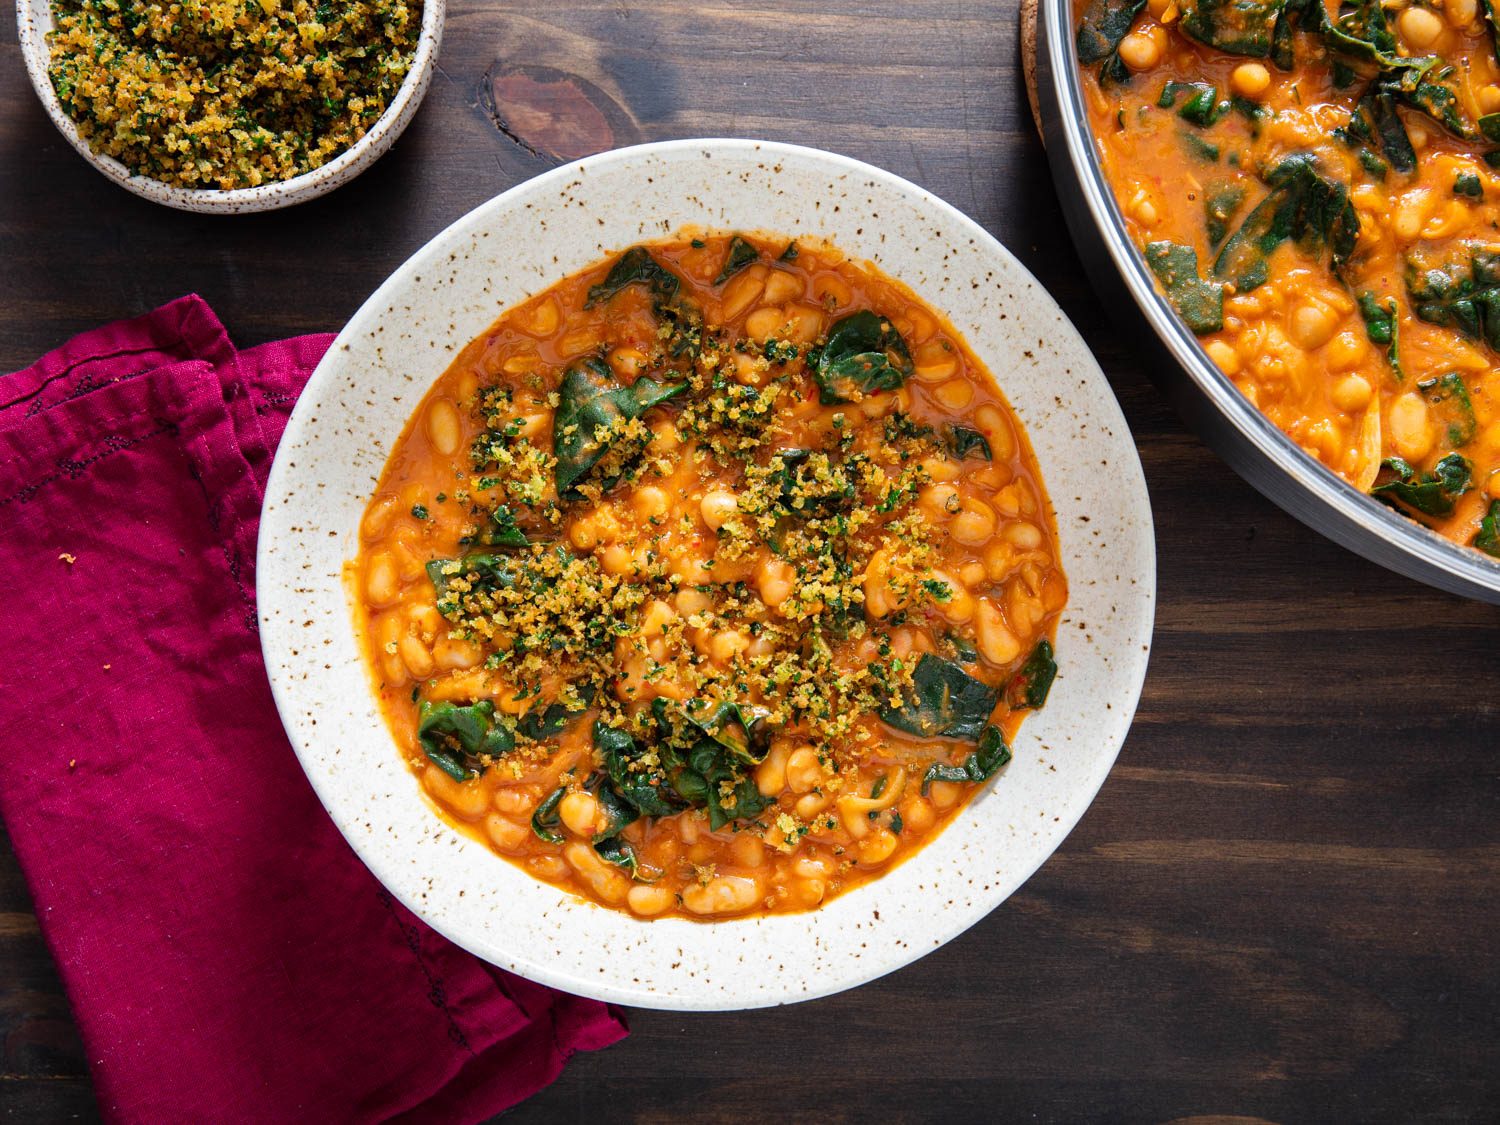 Creamy White Beans With ‘Nduja, Kale, and Gremolata Breadcrumbs